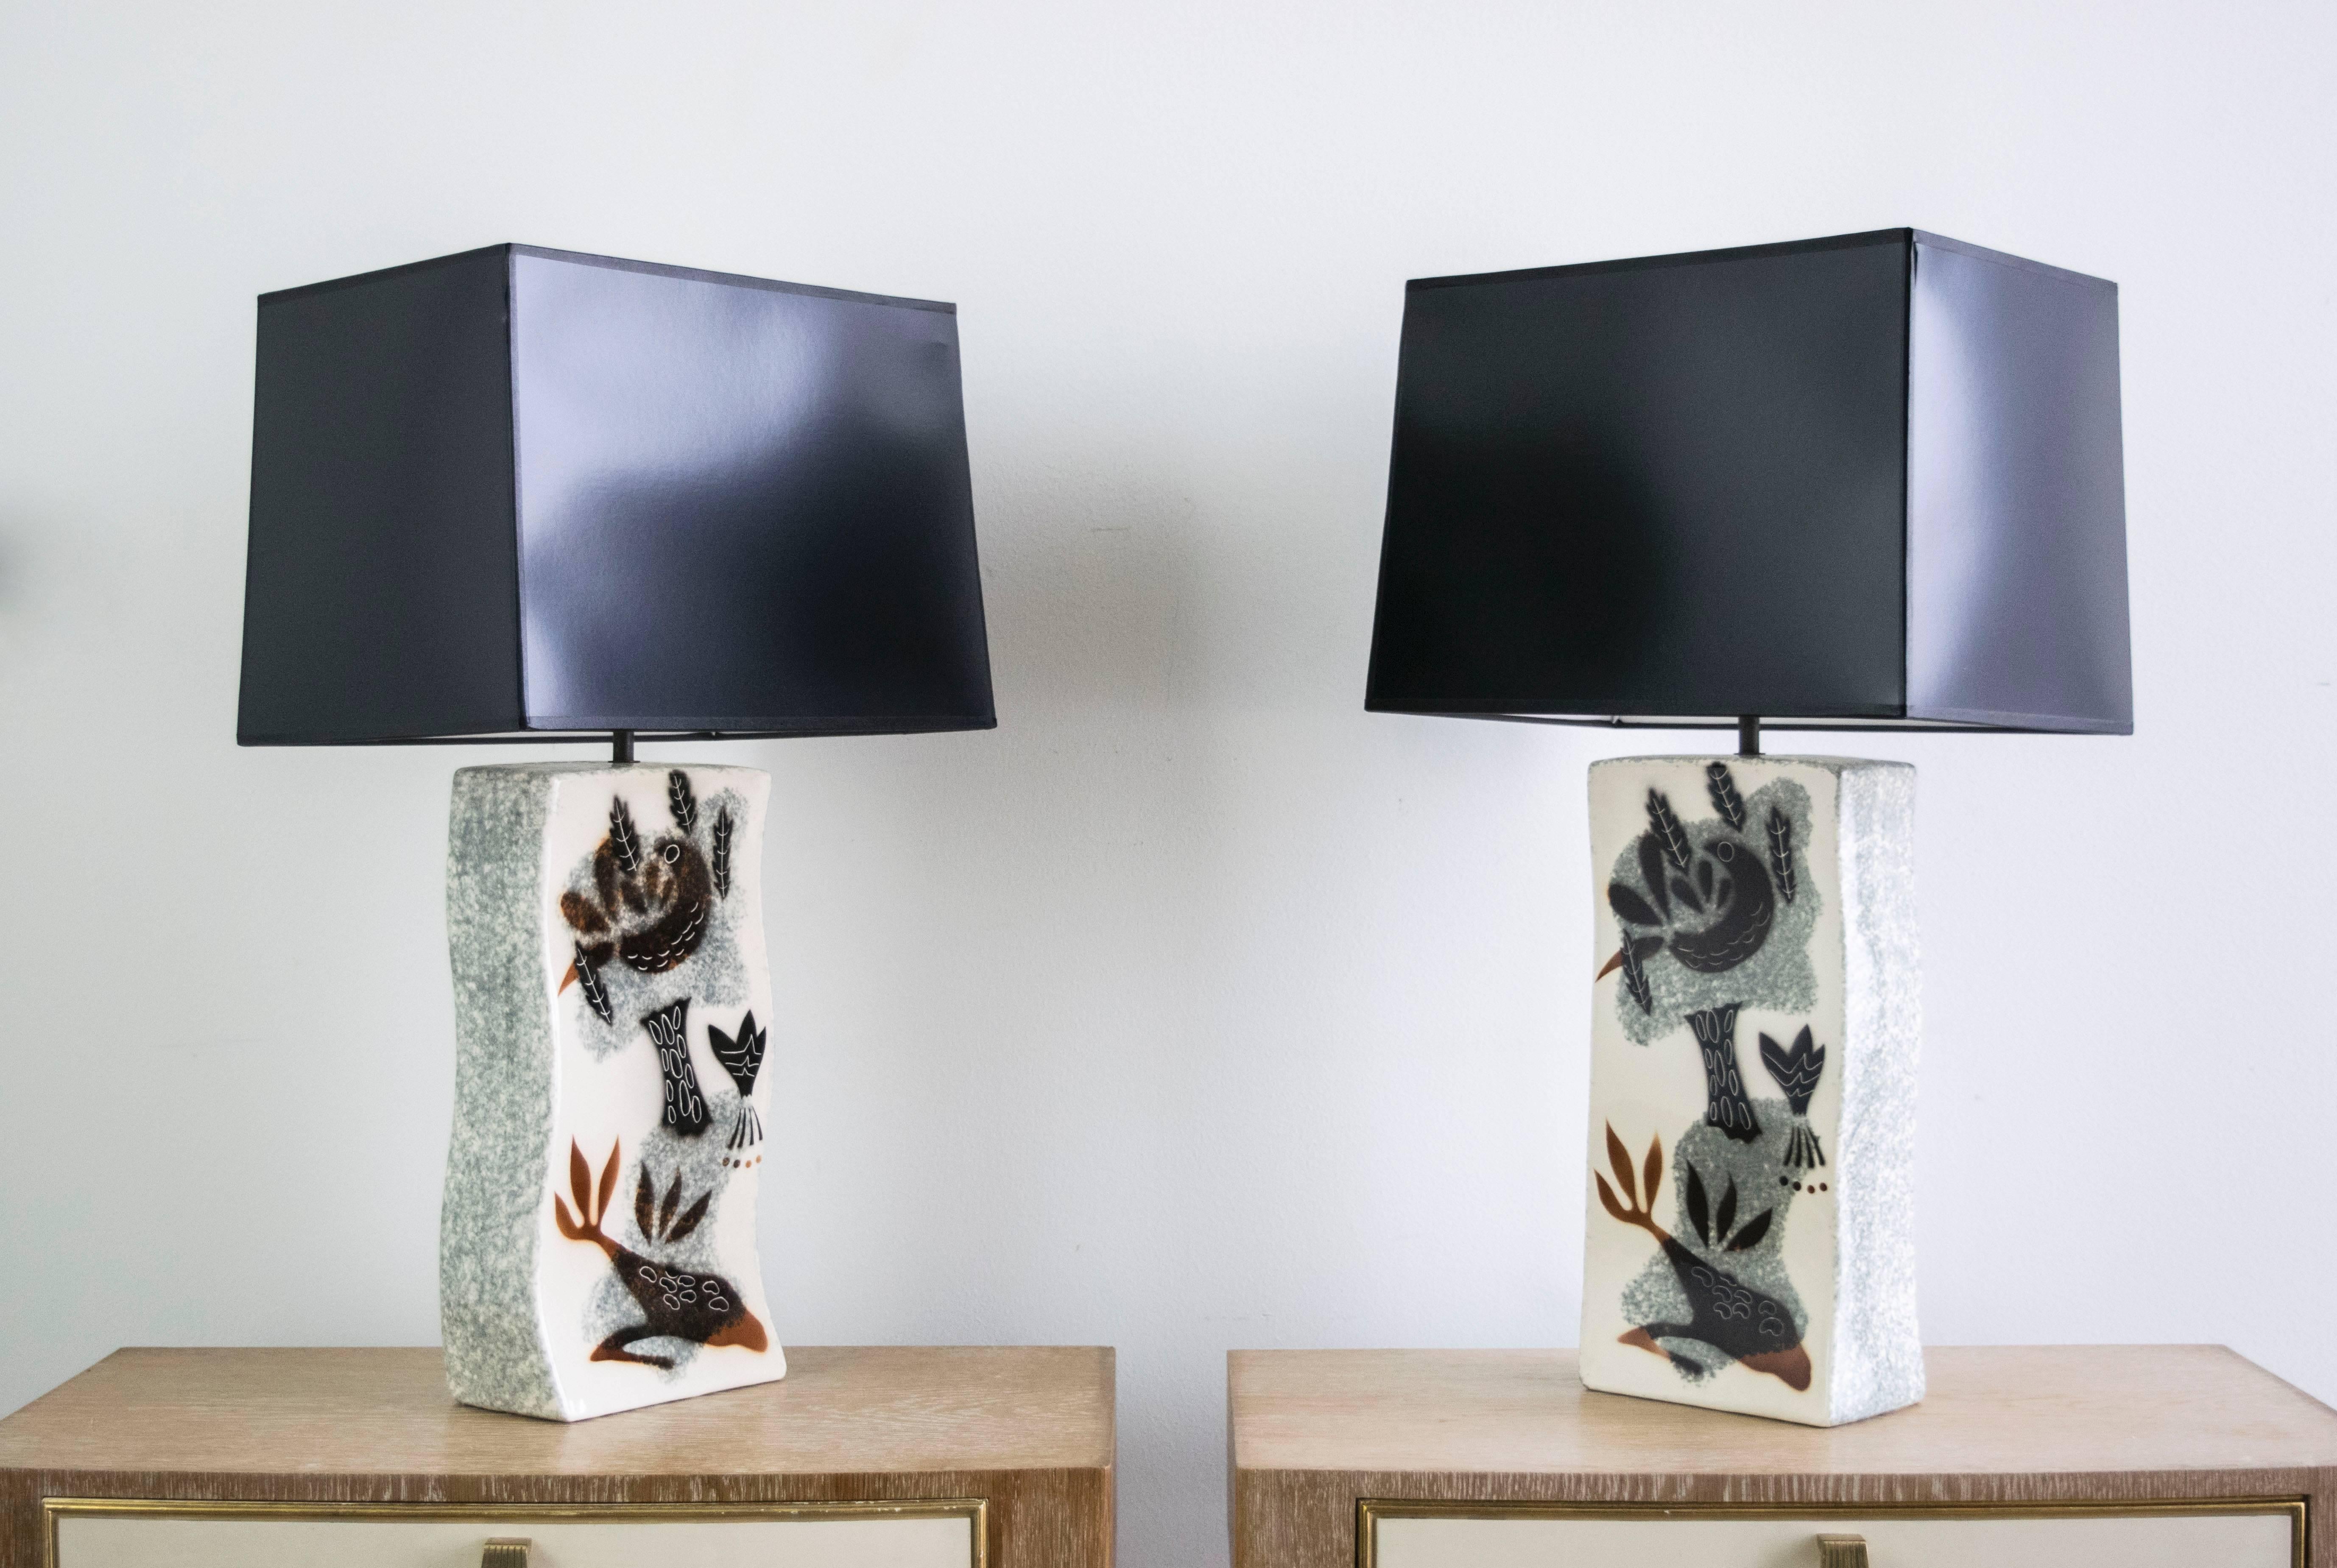 These wonderfully unique lamps have a slight sculptural wave with a speckled grey glaze on the side and an unusual Matisse-like painting on the front.